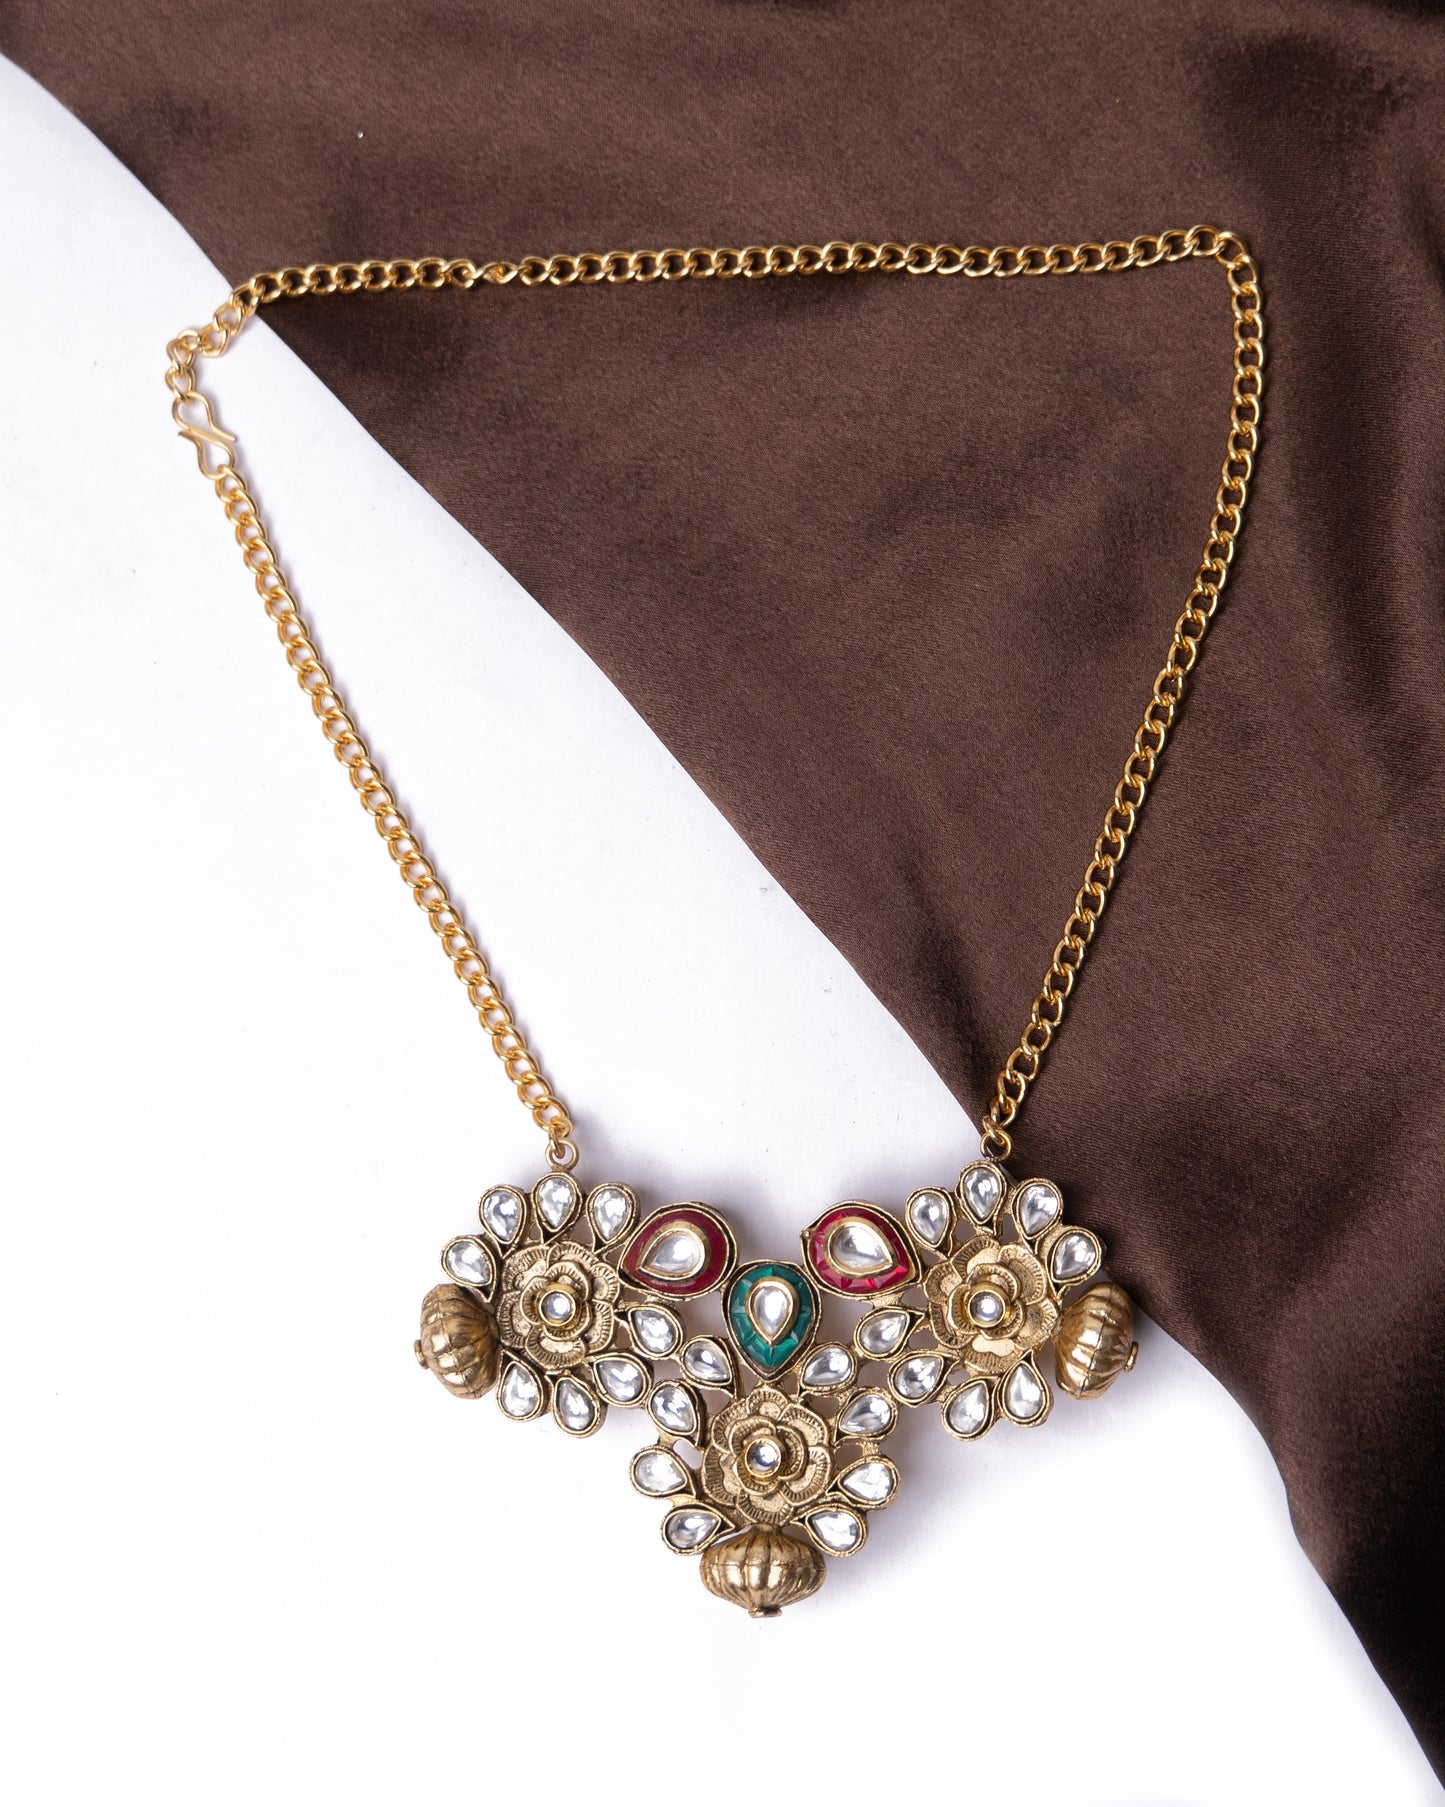 Antique gold and kundan pendant with chain